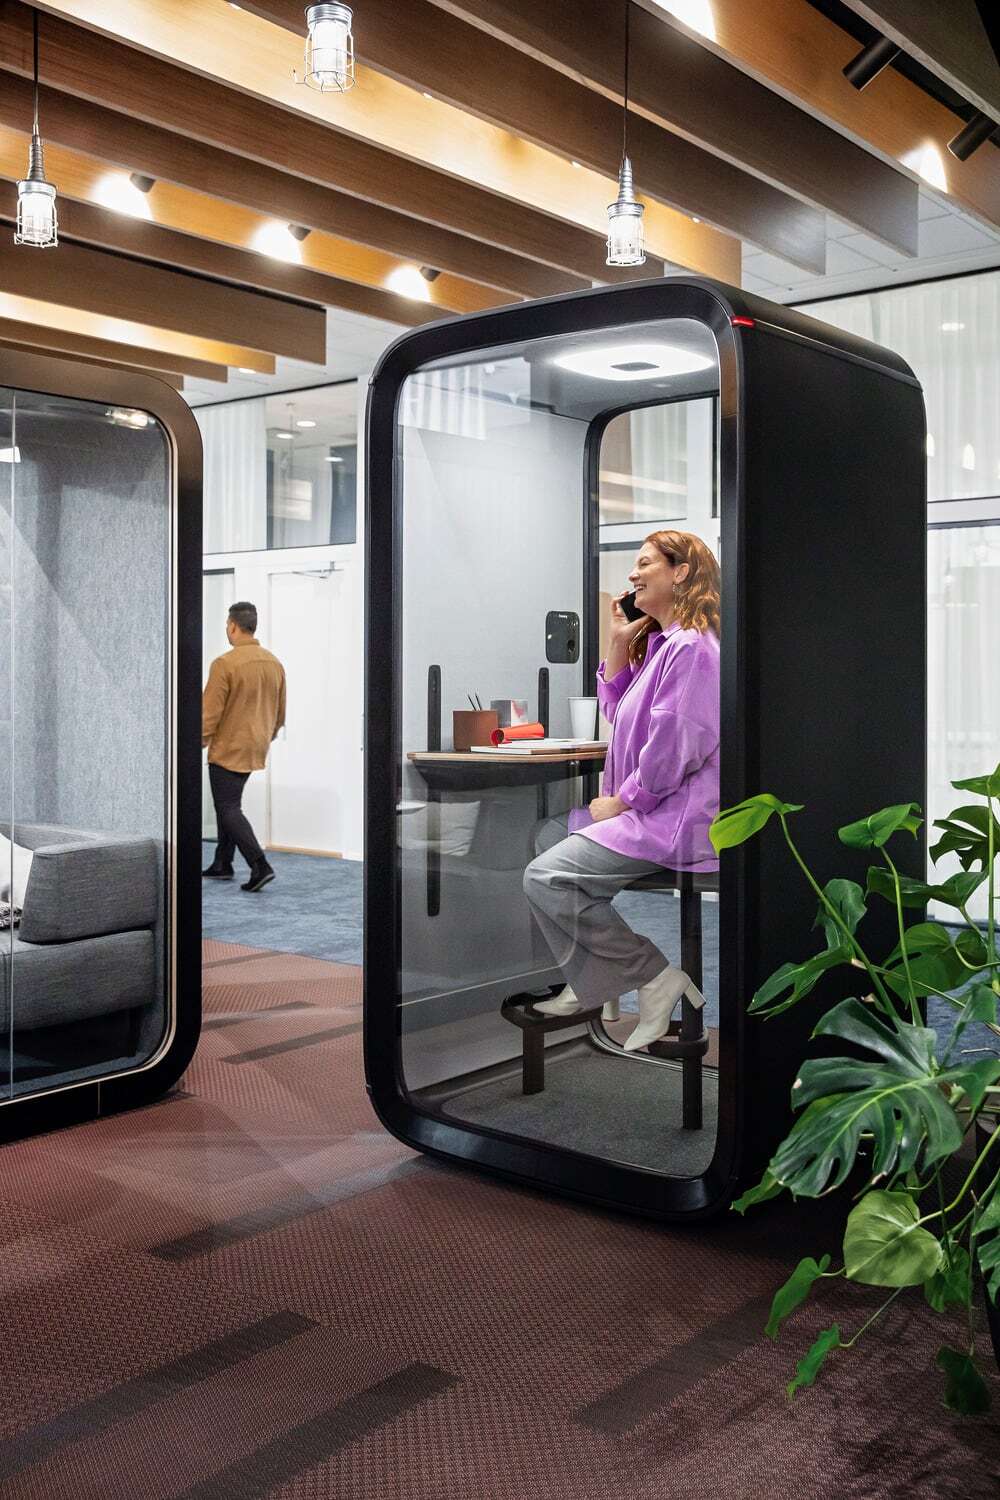 Framery Launches World’s First Connected Phone Booth as Offices Prepare for Growing Demand for Video Conferencing